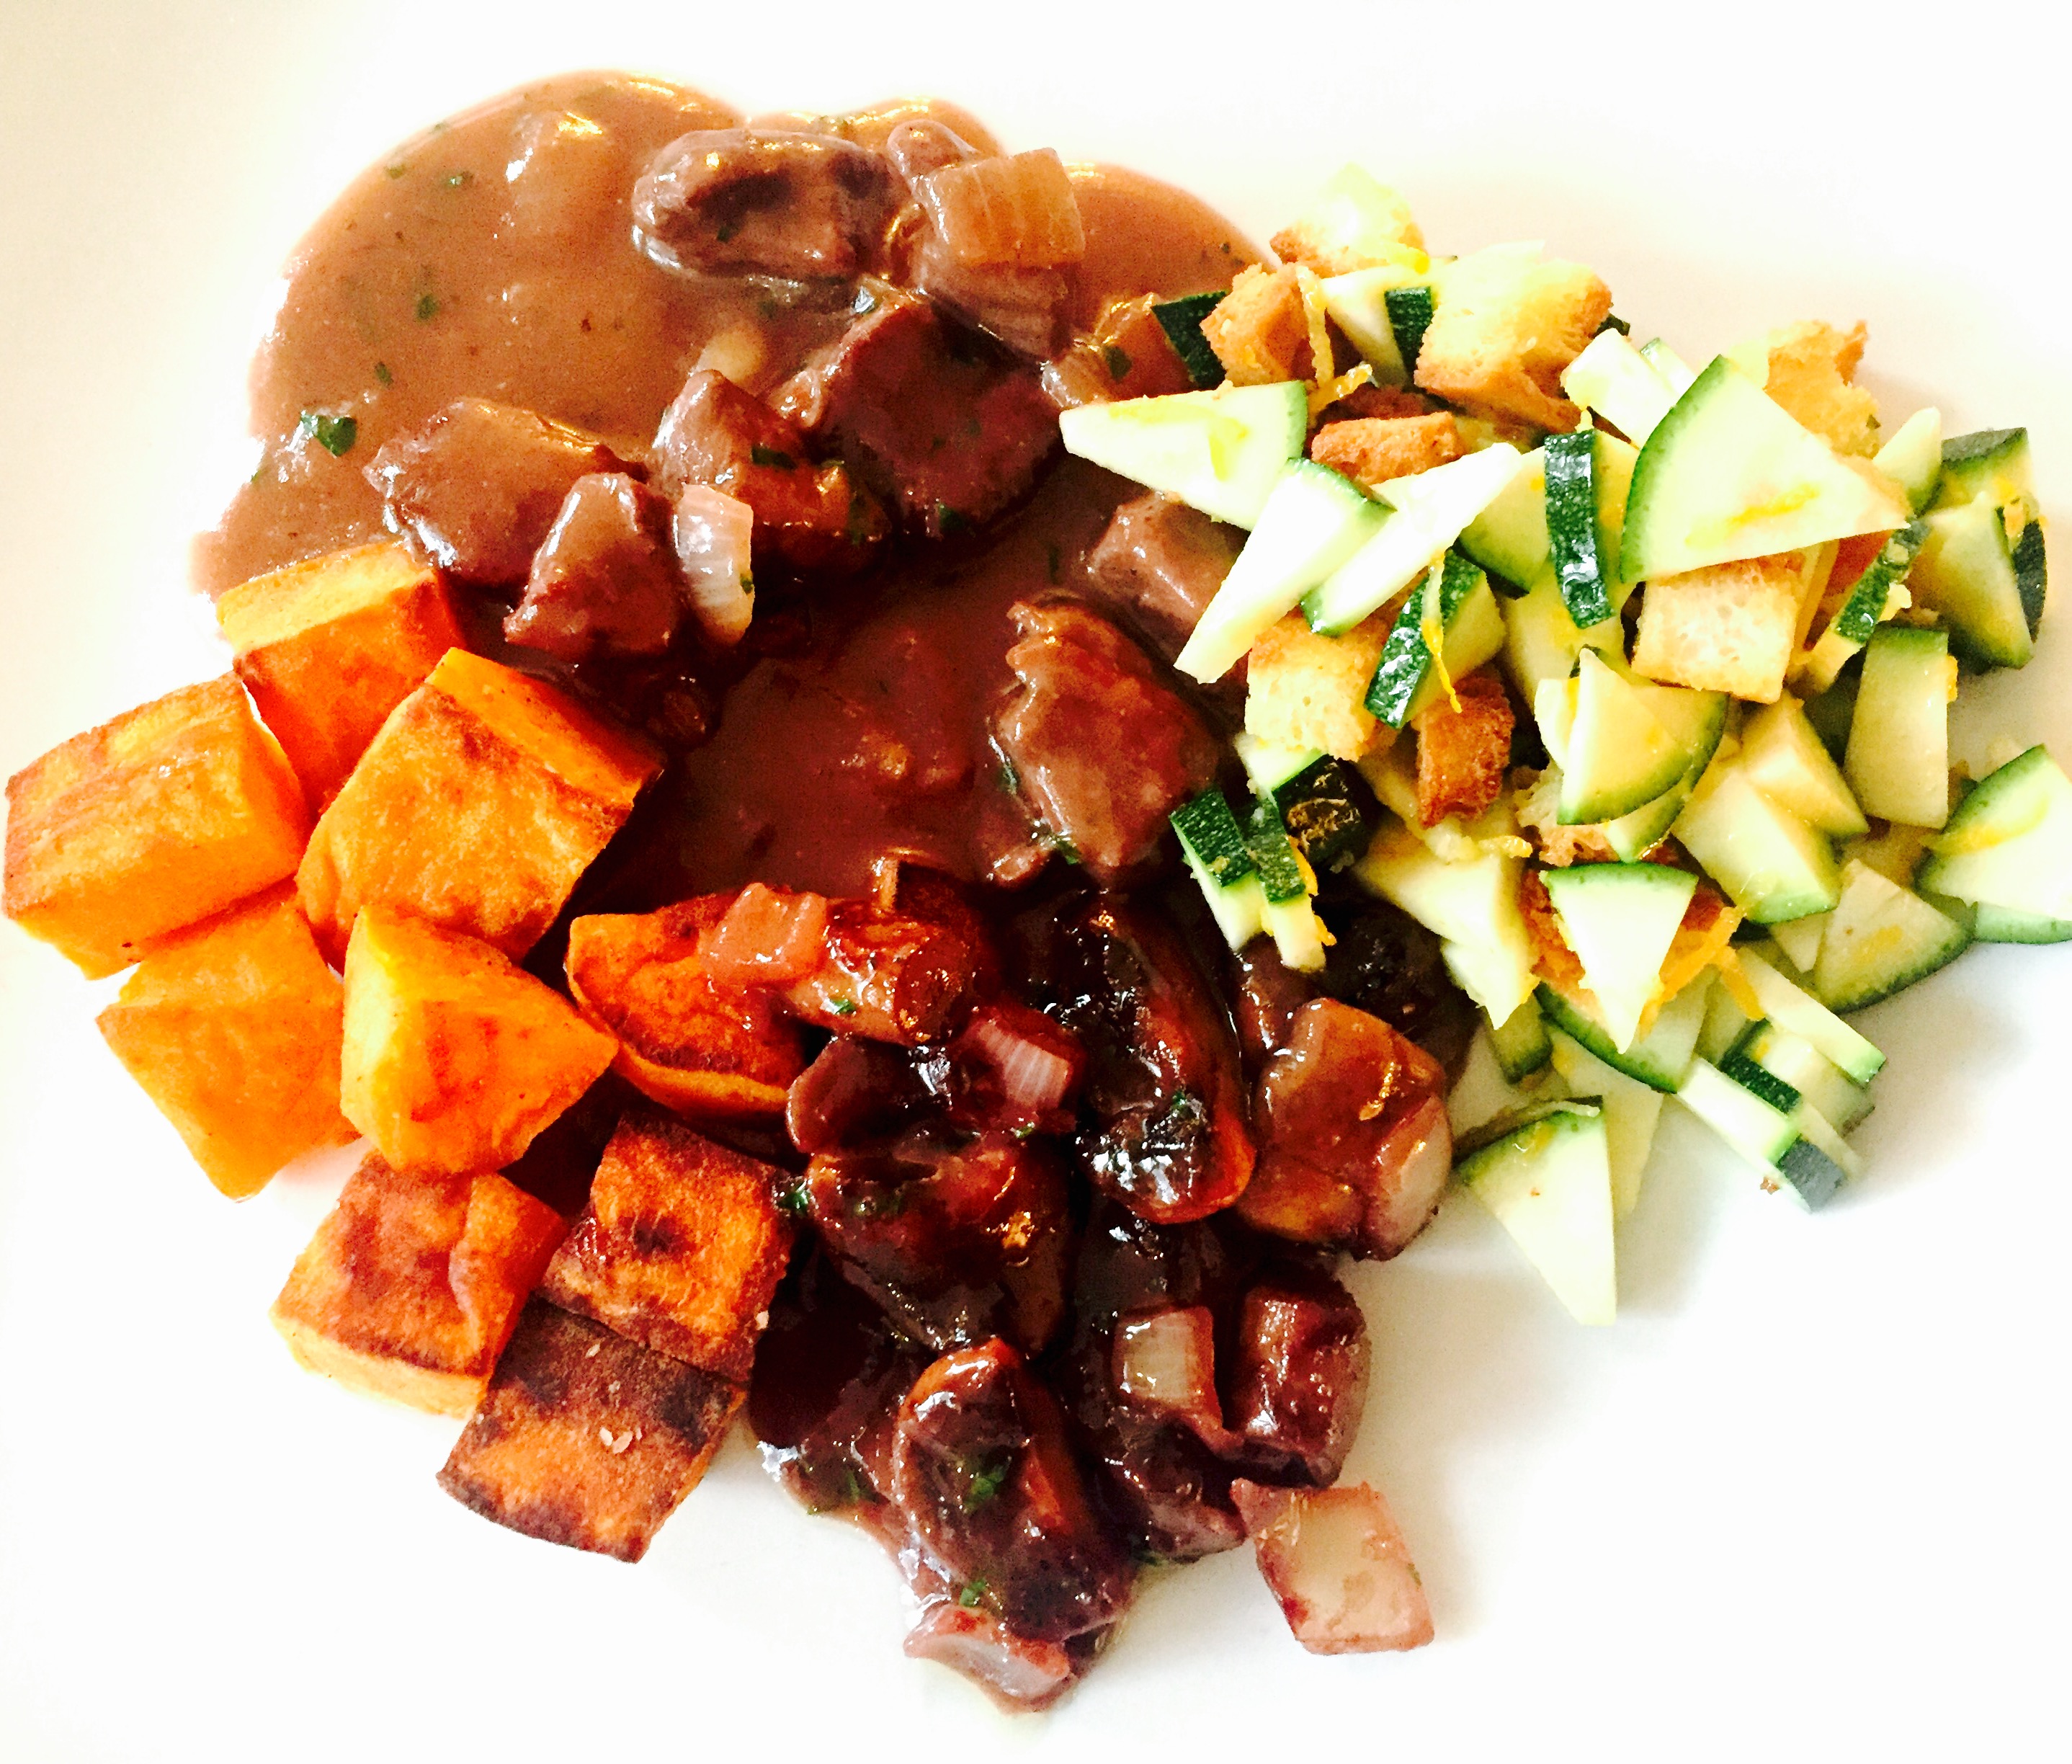 Braised beef & braised mushrooms with zucchini salad and roasted sweet potatoes